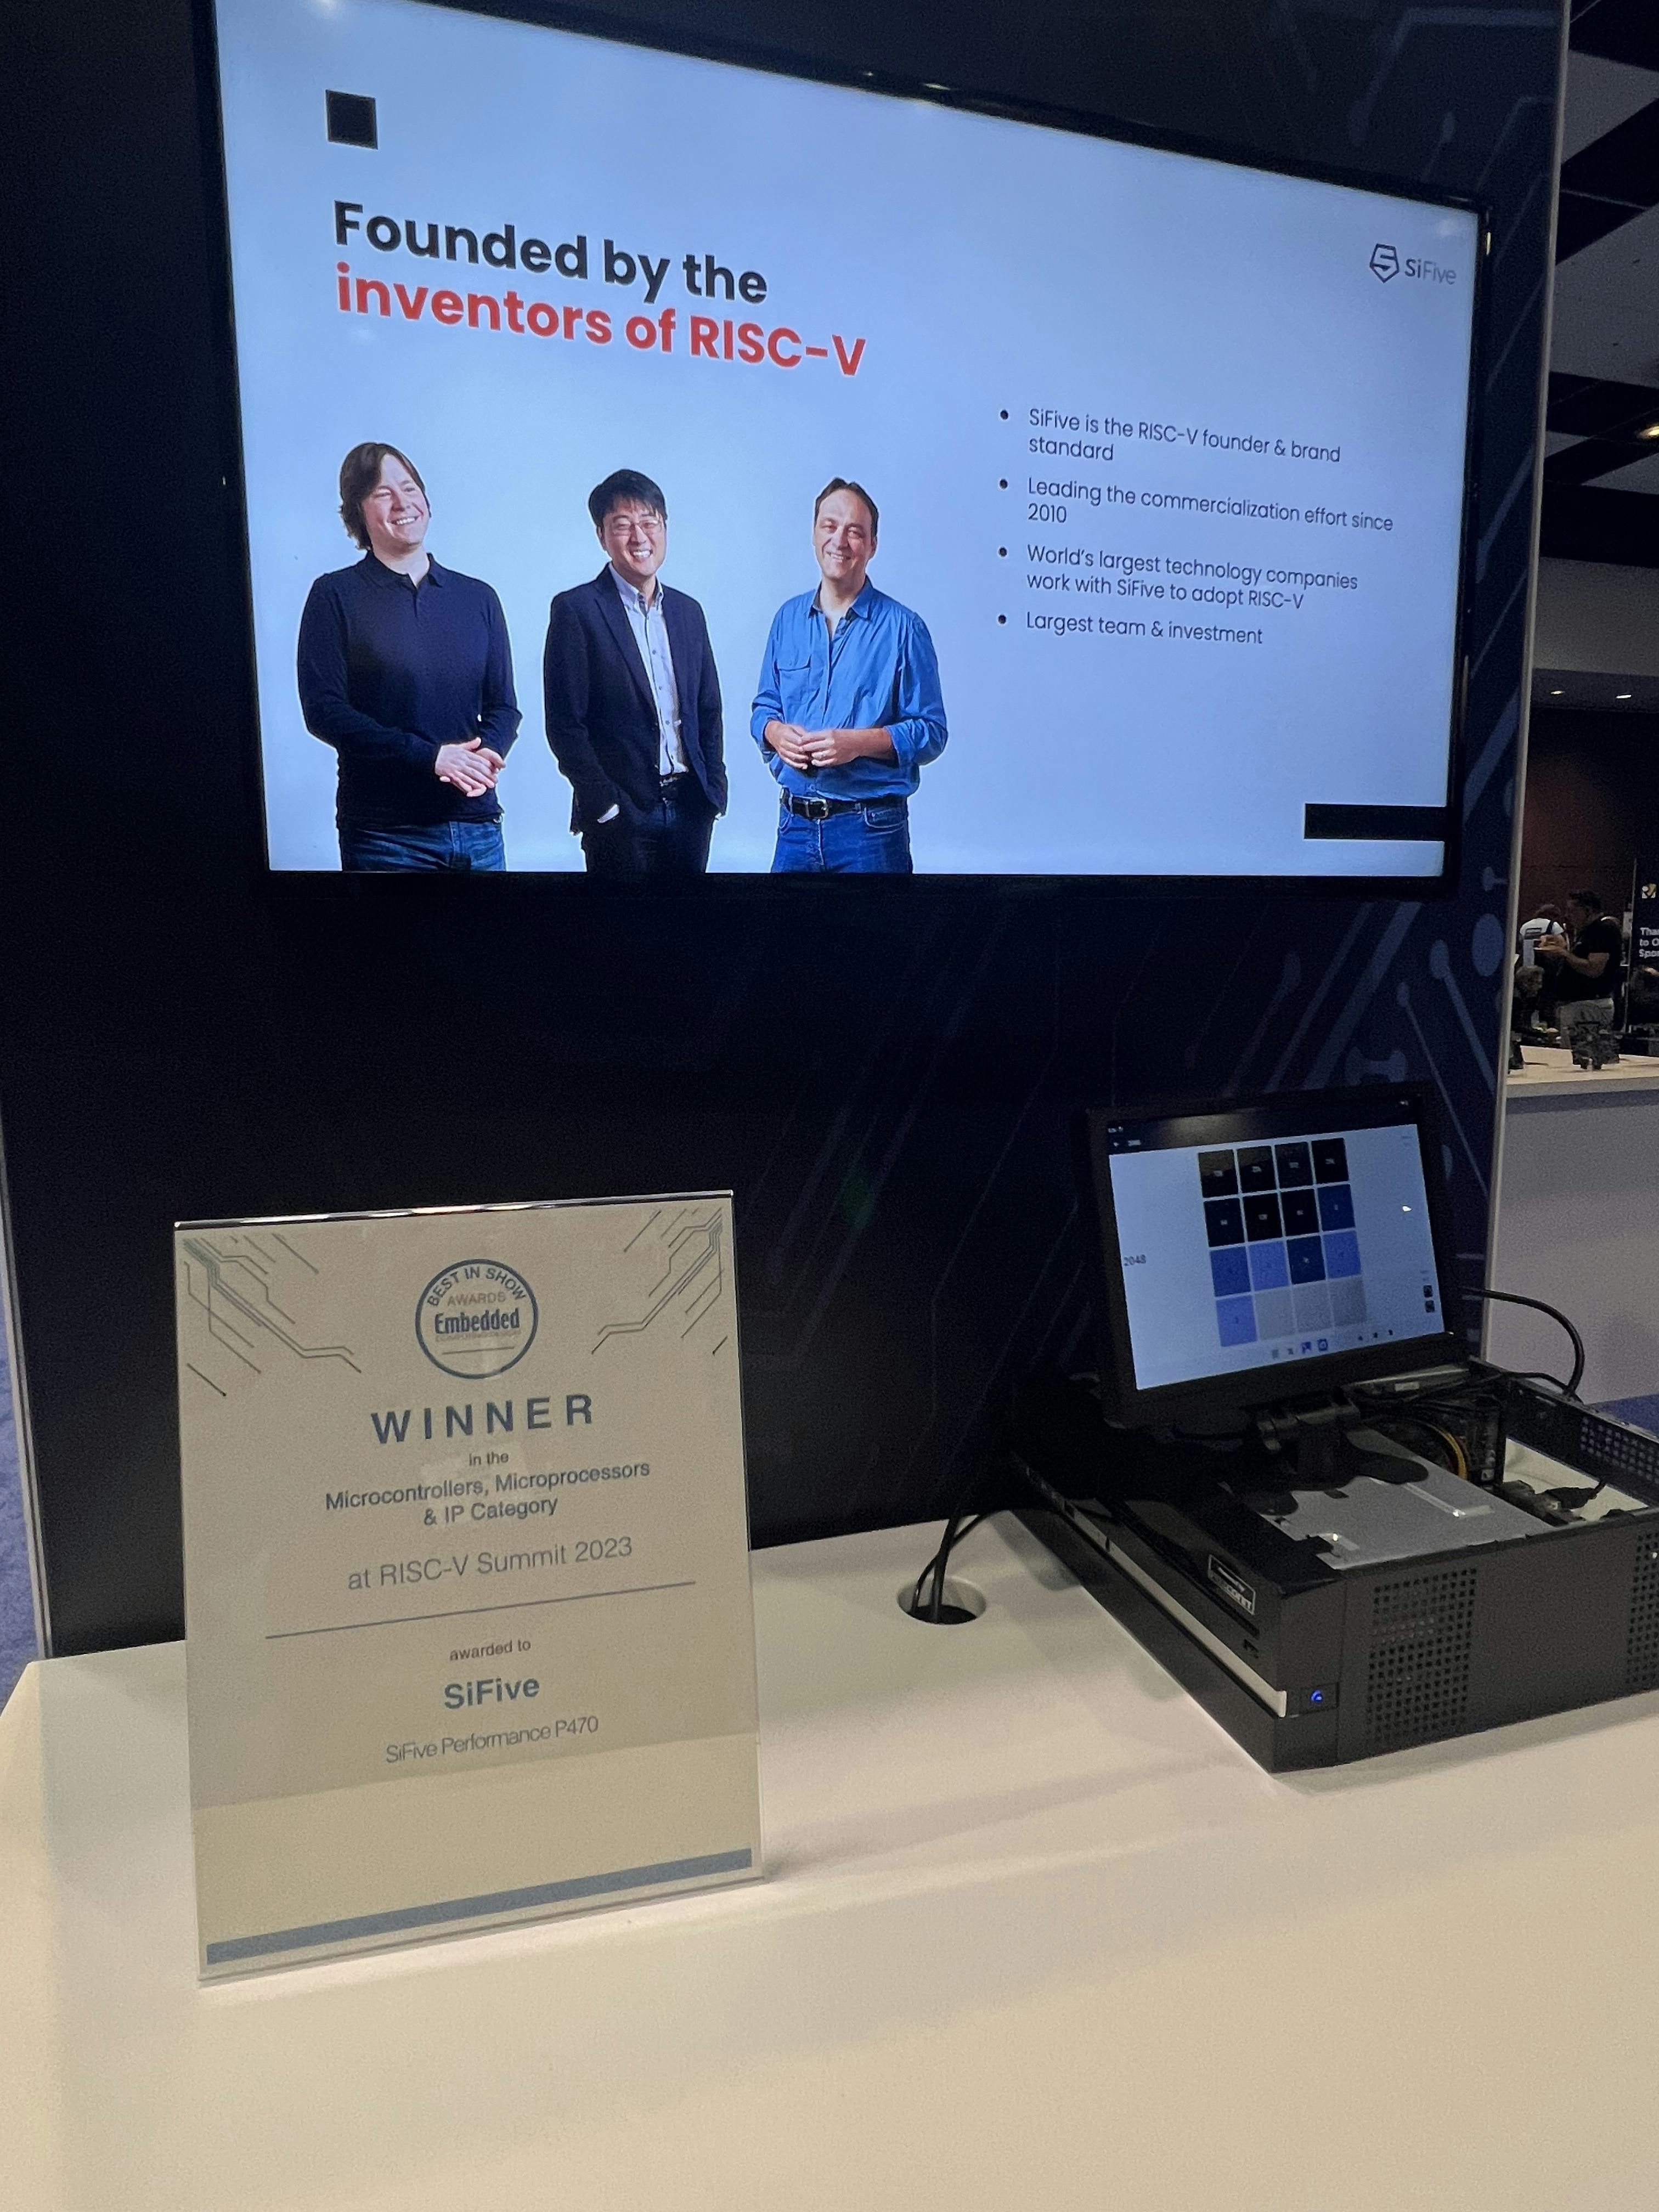 Award on deisplay in the SiFive booth in the Developer Zone at the RISC-V Summit